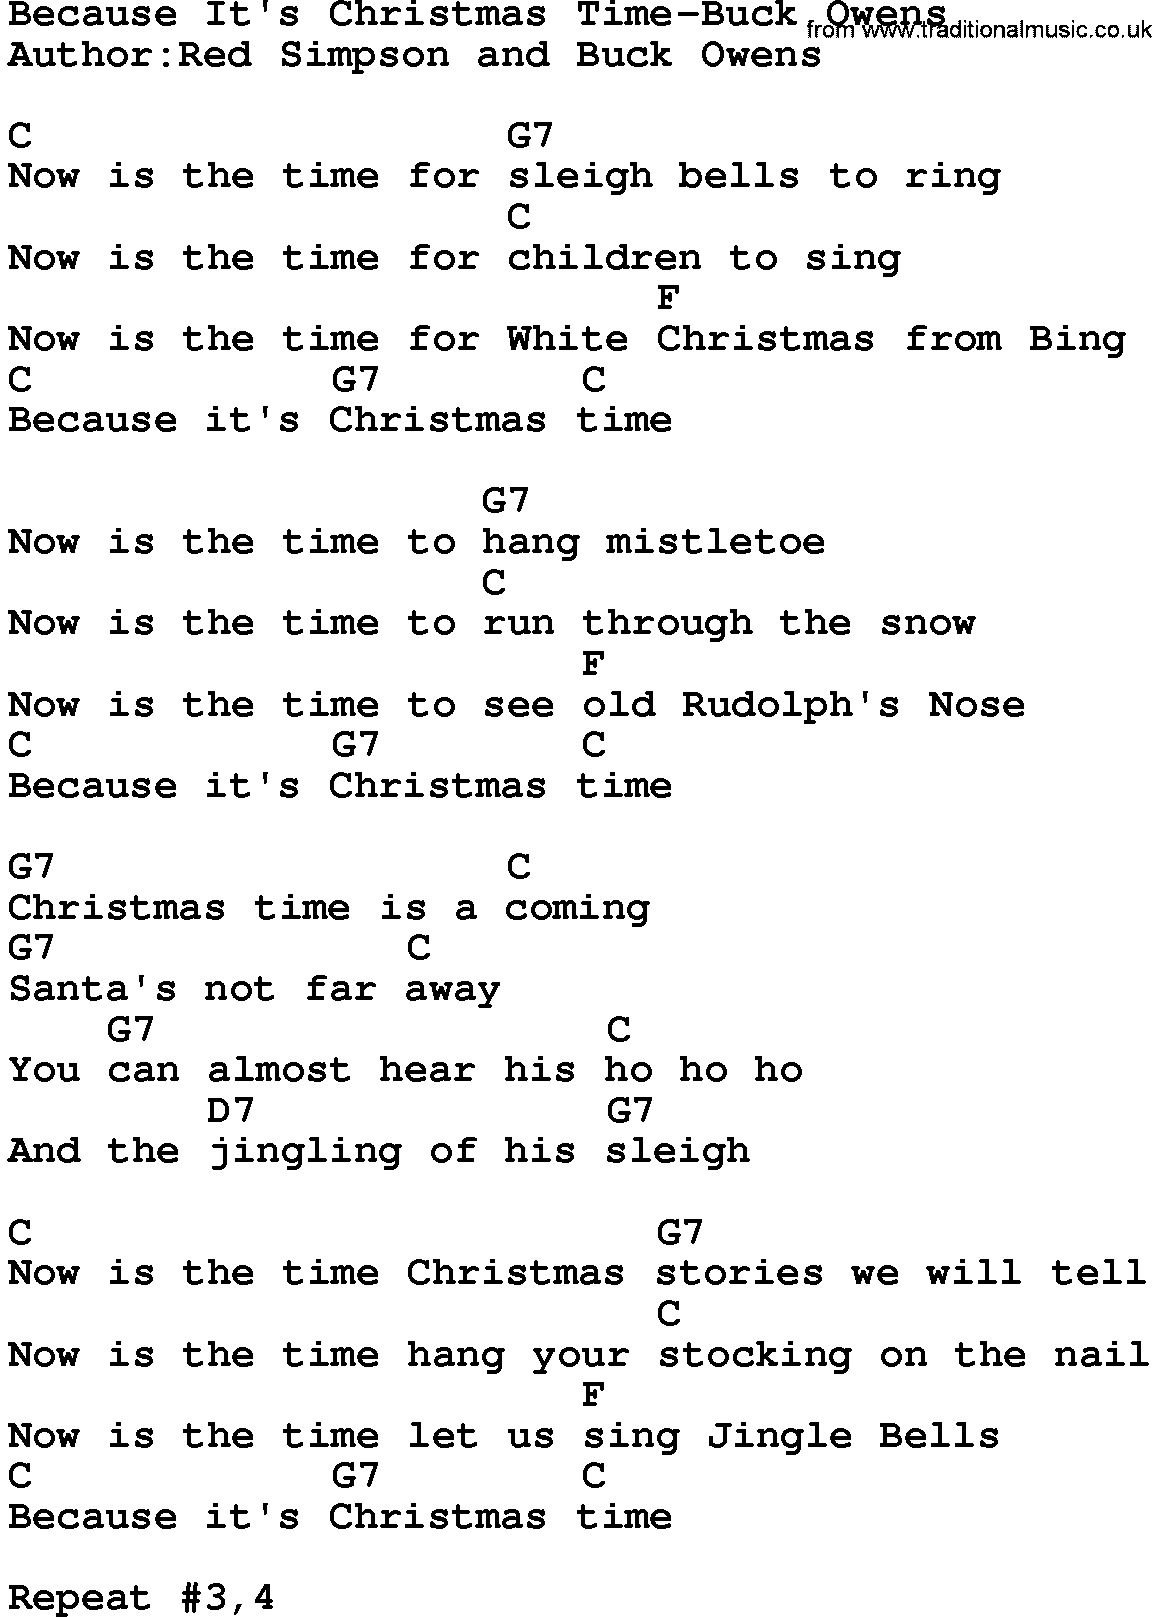 Country music song: Because It's Christmas Time-Buck Owens lyrics and chords